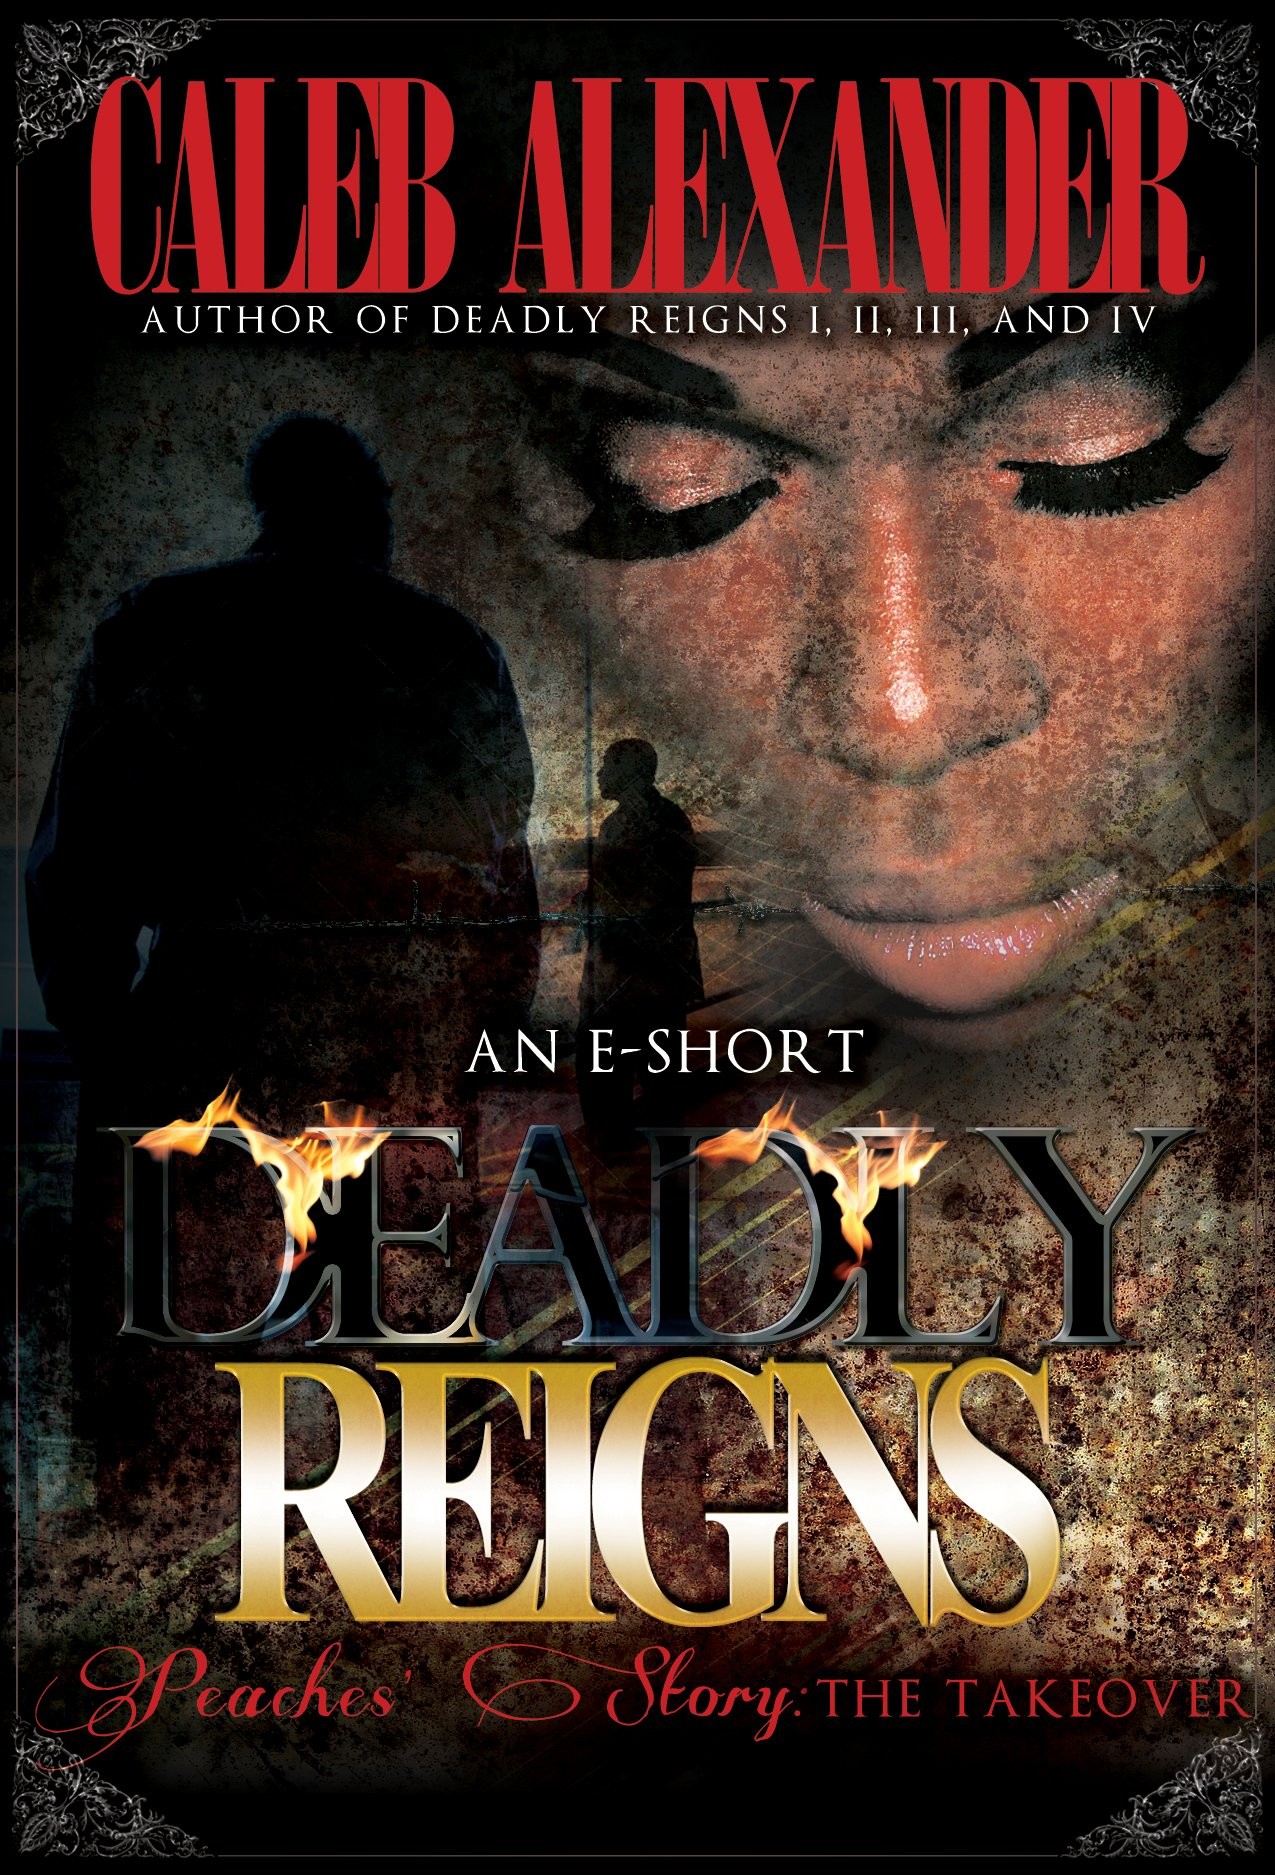 Deadly Reigns- Peaches' Story the Takeover